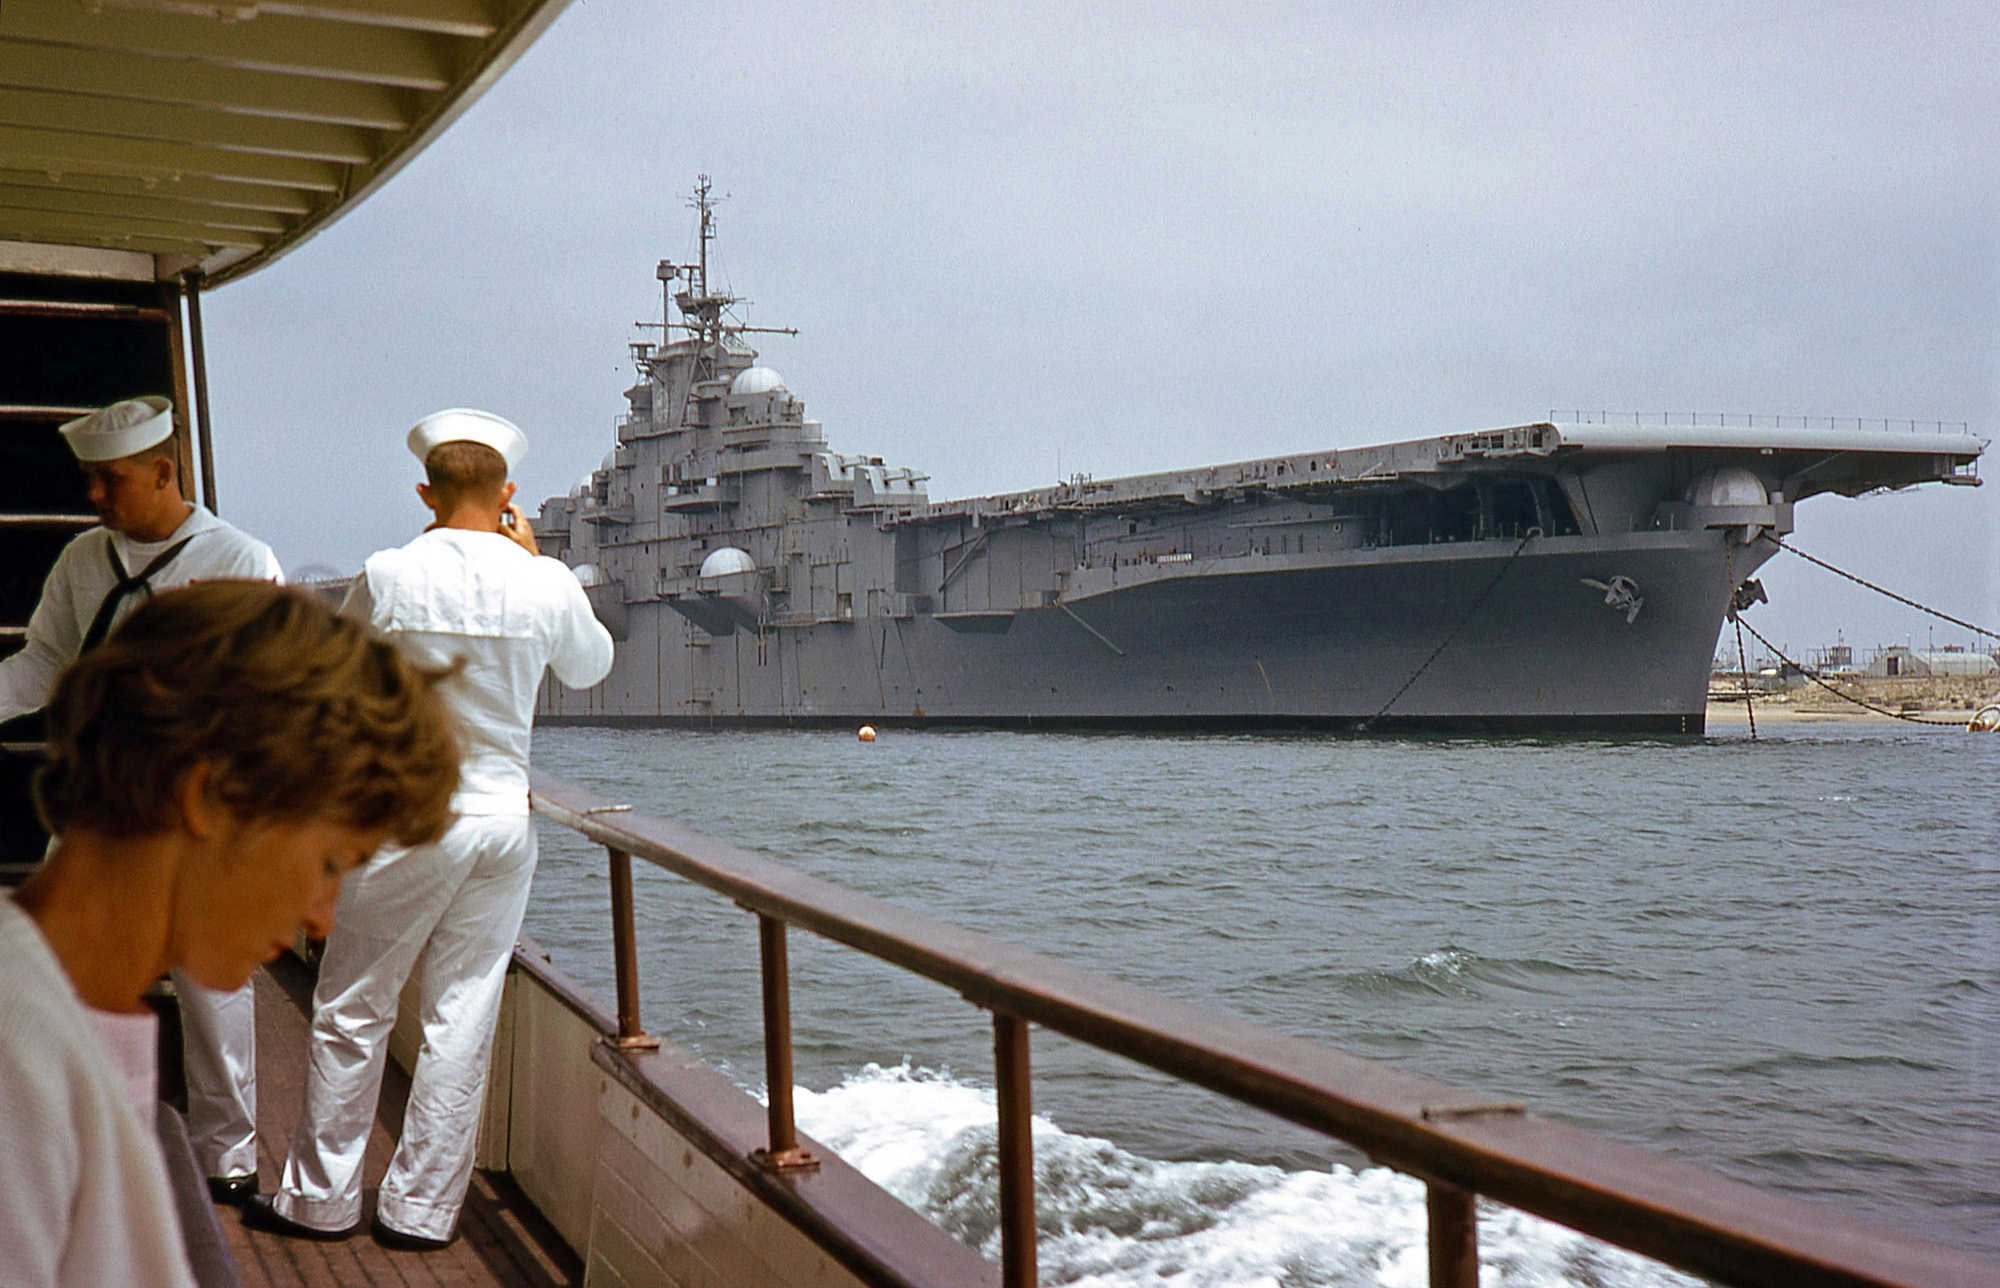 This was taken during the San Diego Harbor cruise in July, 1966. Can anyone identify the carrier? It's got those big deck guns, which makes me think it's World War II vintage. Photo by my dad. View full size.